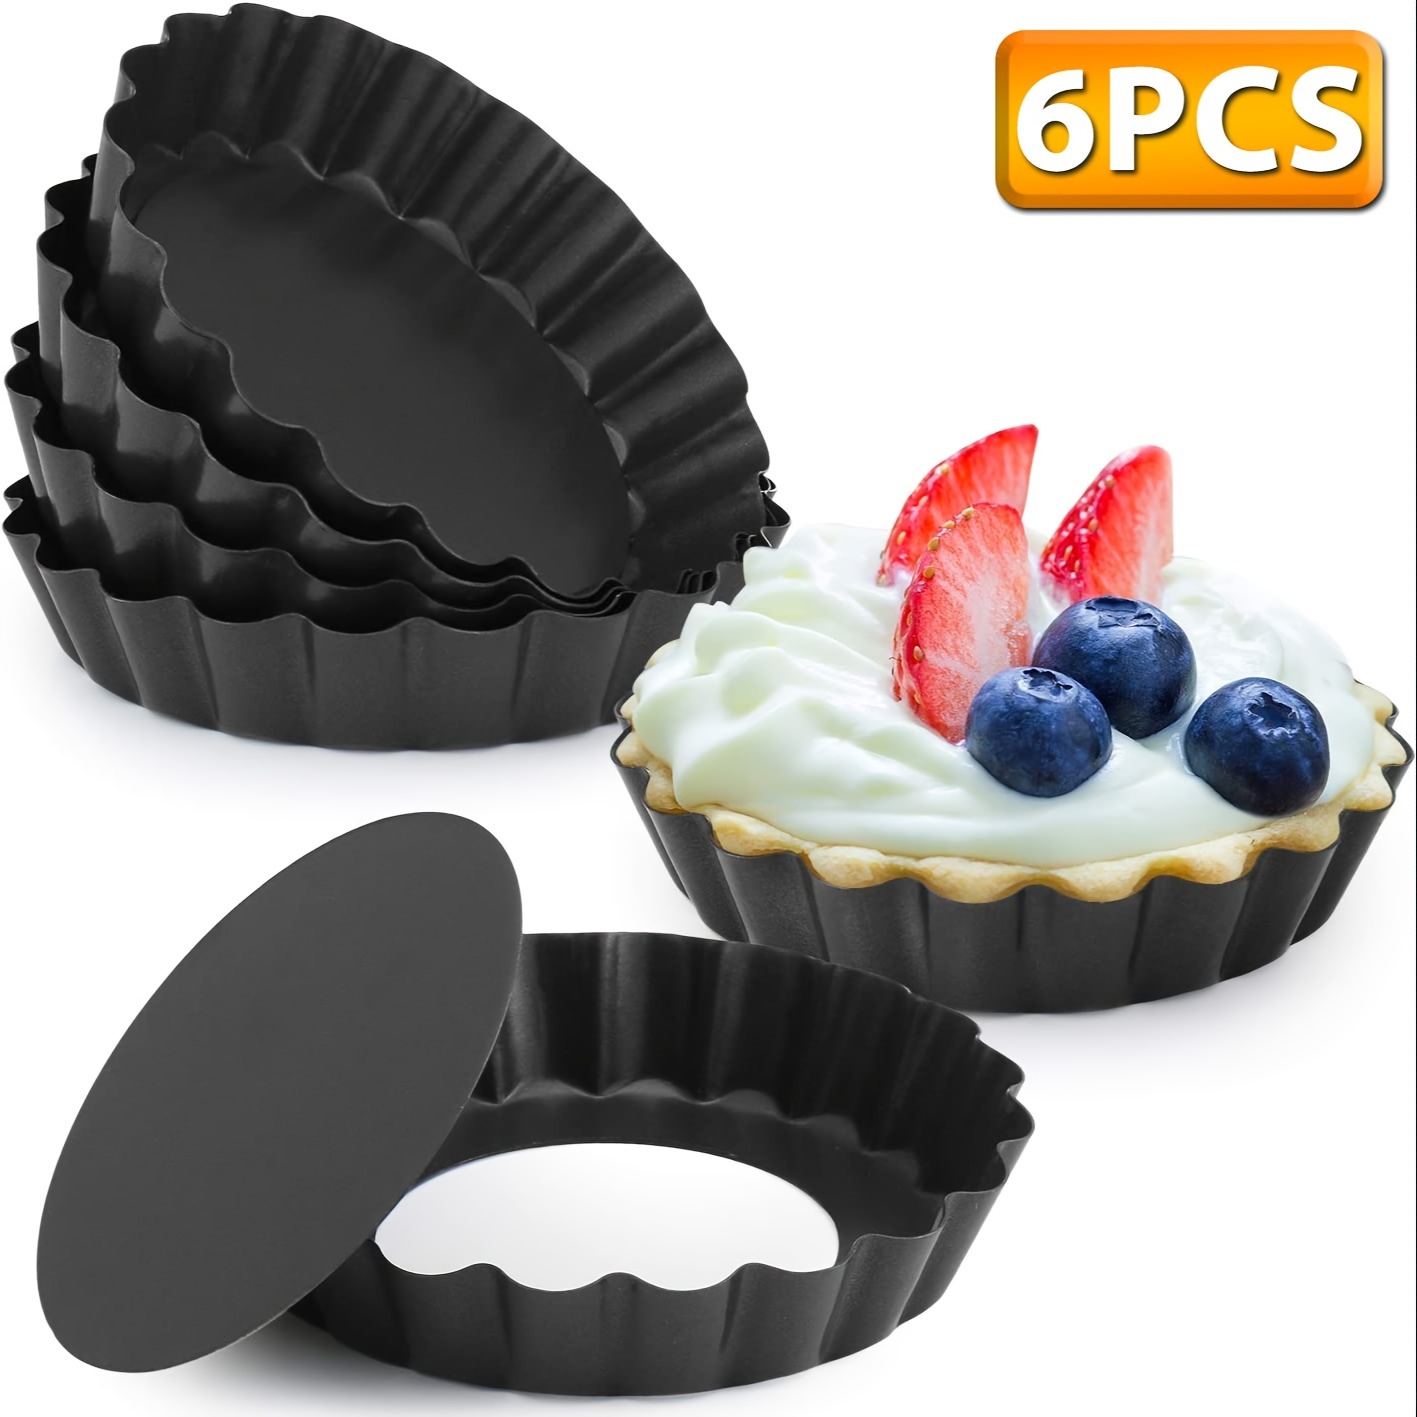 

6pcs Mini Tart Pans 4 Inch With Removable Bottom, Nonstick Round Quiche Pie Pan Set, Cupcake Muffin Mold Tin Pan Baking Tool, Reusable Quiche Bakeware Carbon Steel For Pies, Cheese Cakes, Desserts